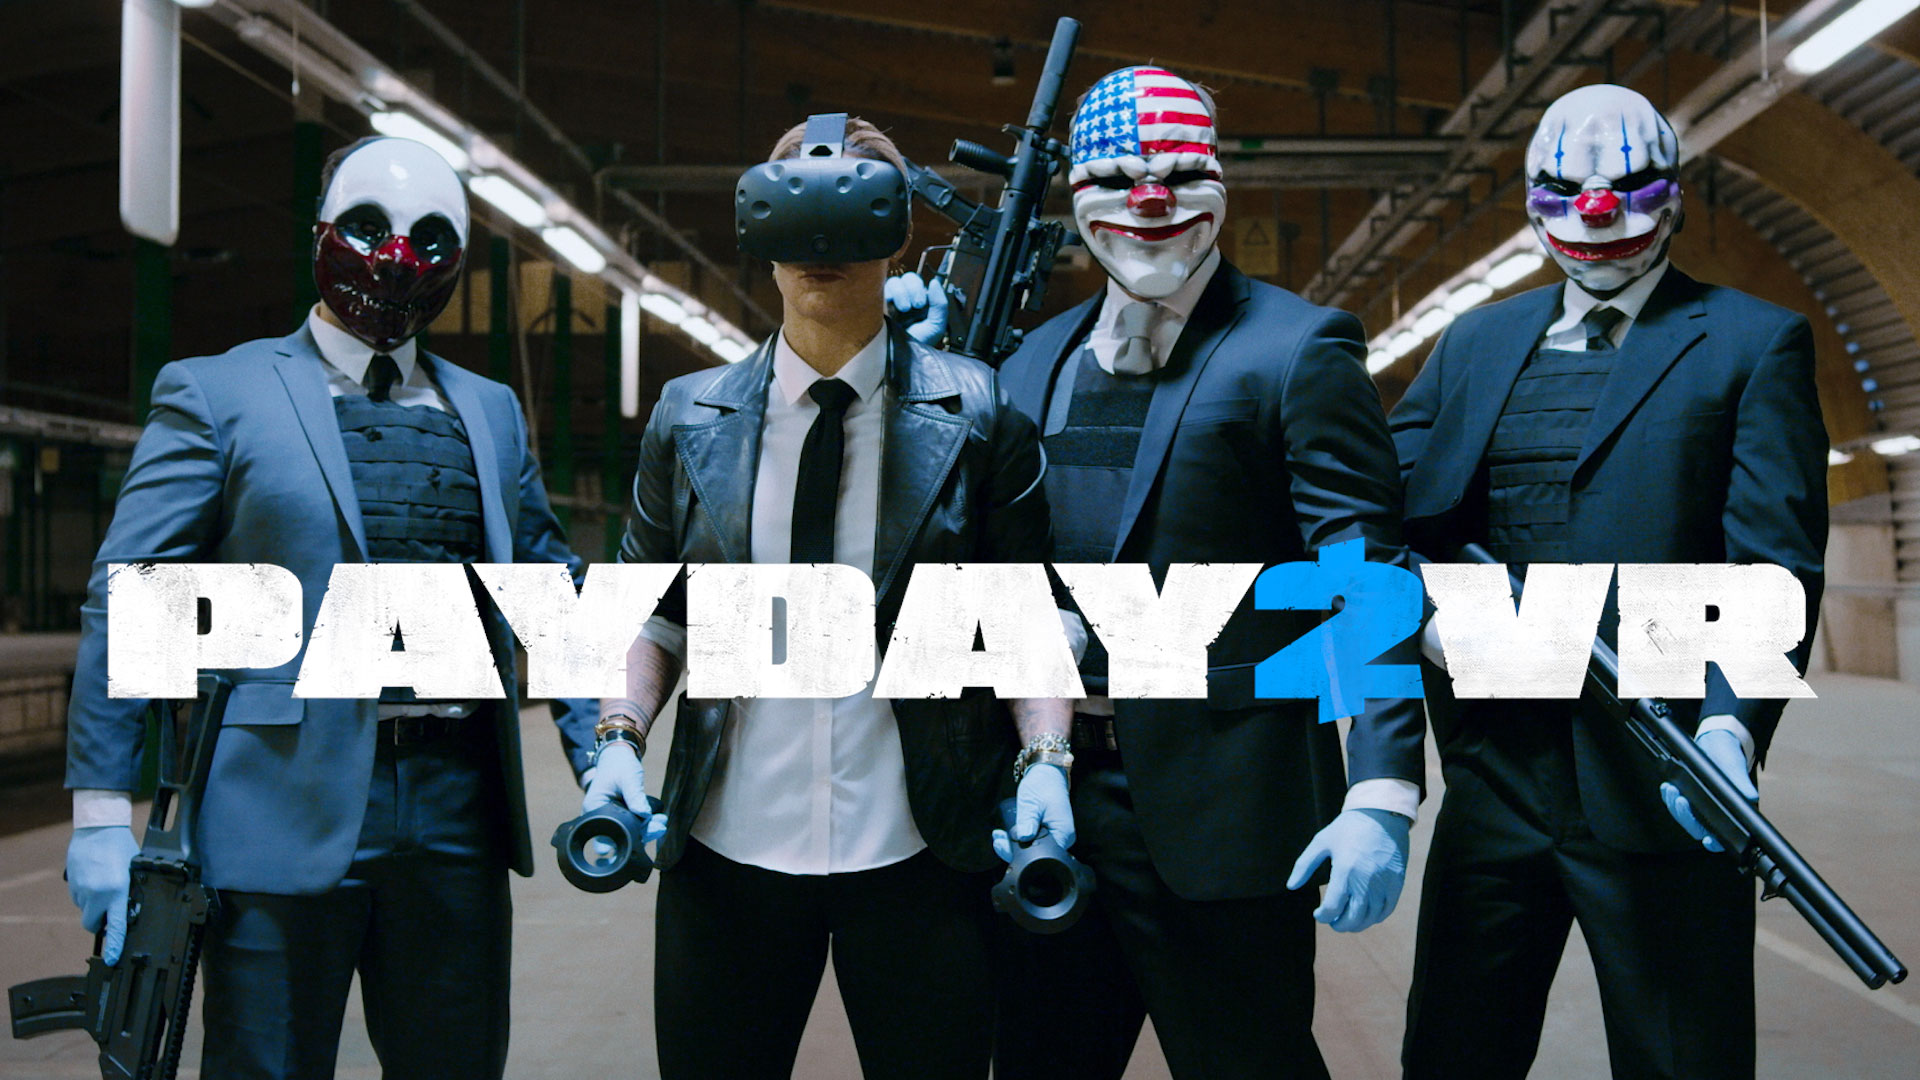 Join lobby payday 2 фото 94